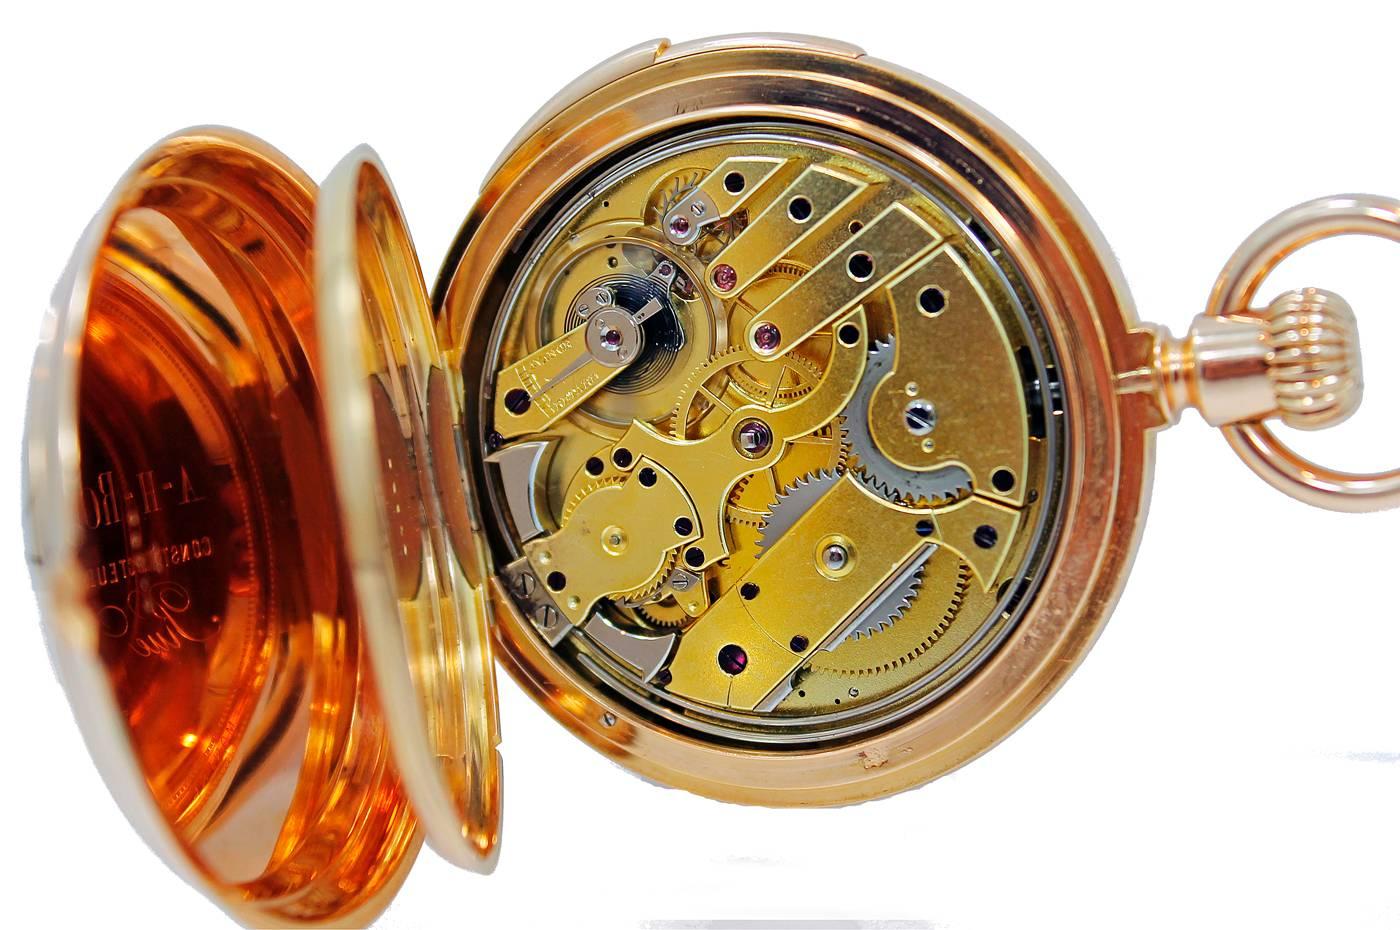 Patek Philippe Yellow Gold 5-Minute Repeater Pocket Watch 2